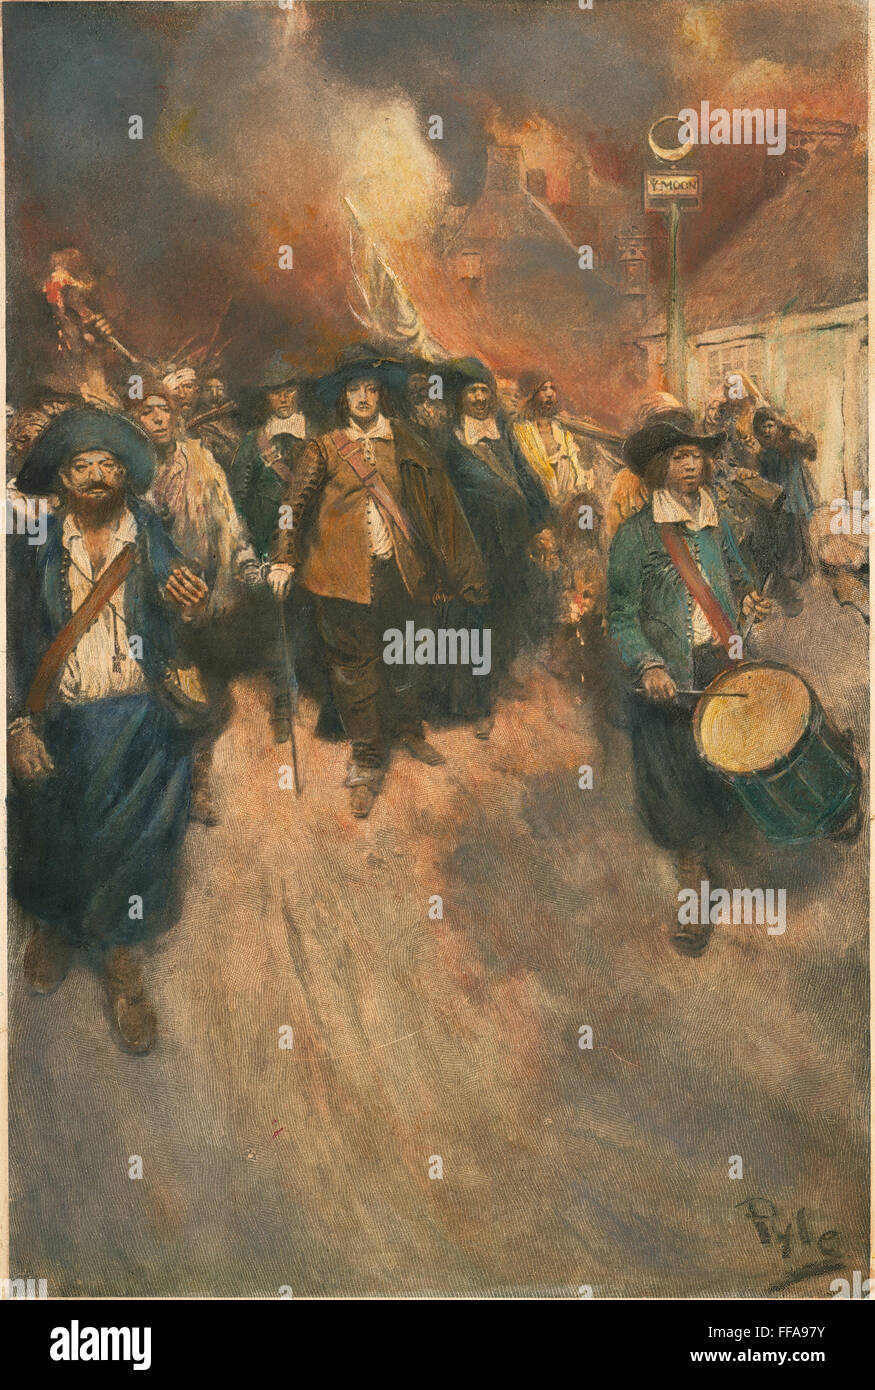 JAMESTOWN: N. BACON, 1676. /nNathaniel Bacon (center) and his followers at the burning of Jamestown, Virginia, on 19 September 1676. Illustration by Howard Pyle. Stock Photo